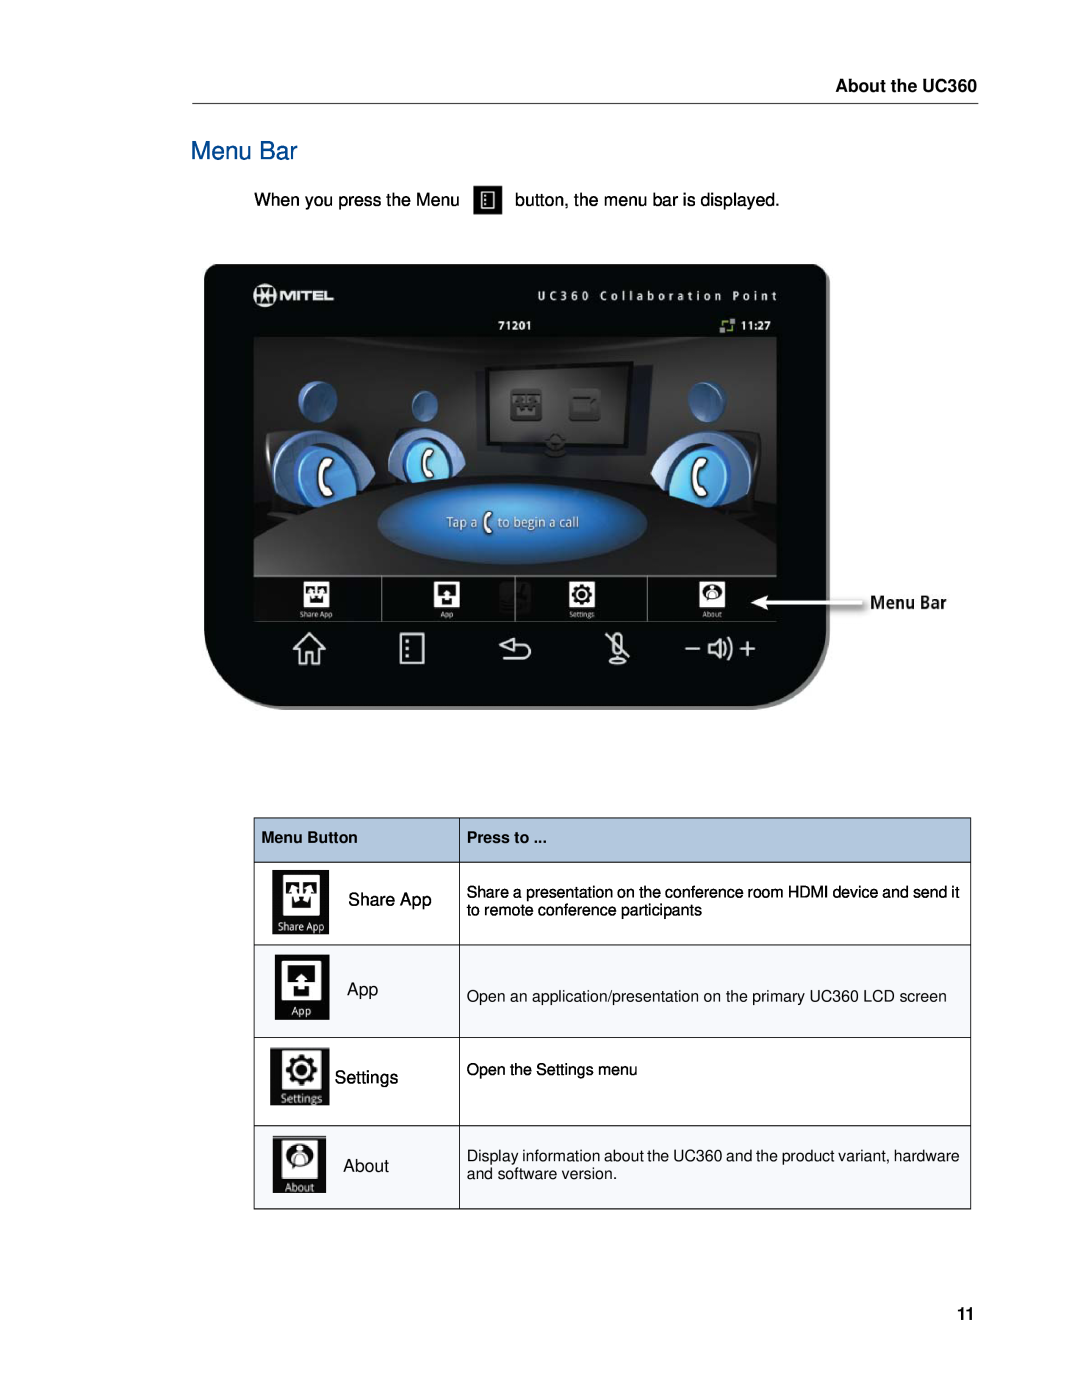 Mitel manual Menu Bar, About the UC360, When you press the Menu button, the menu bar is displayed, Share App, Settings 